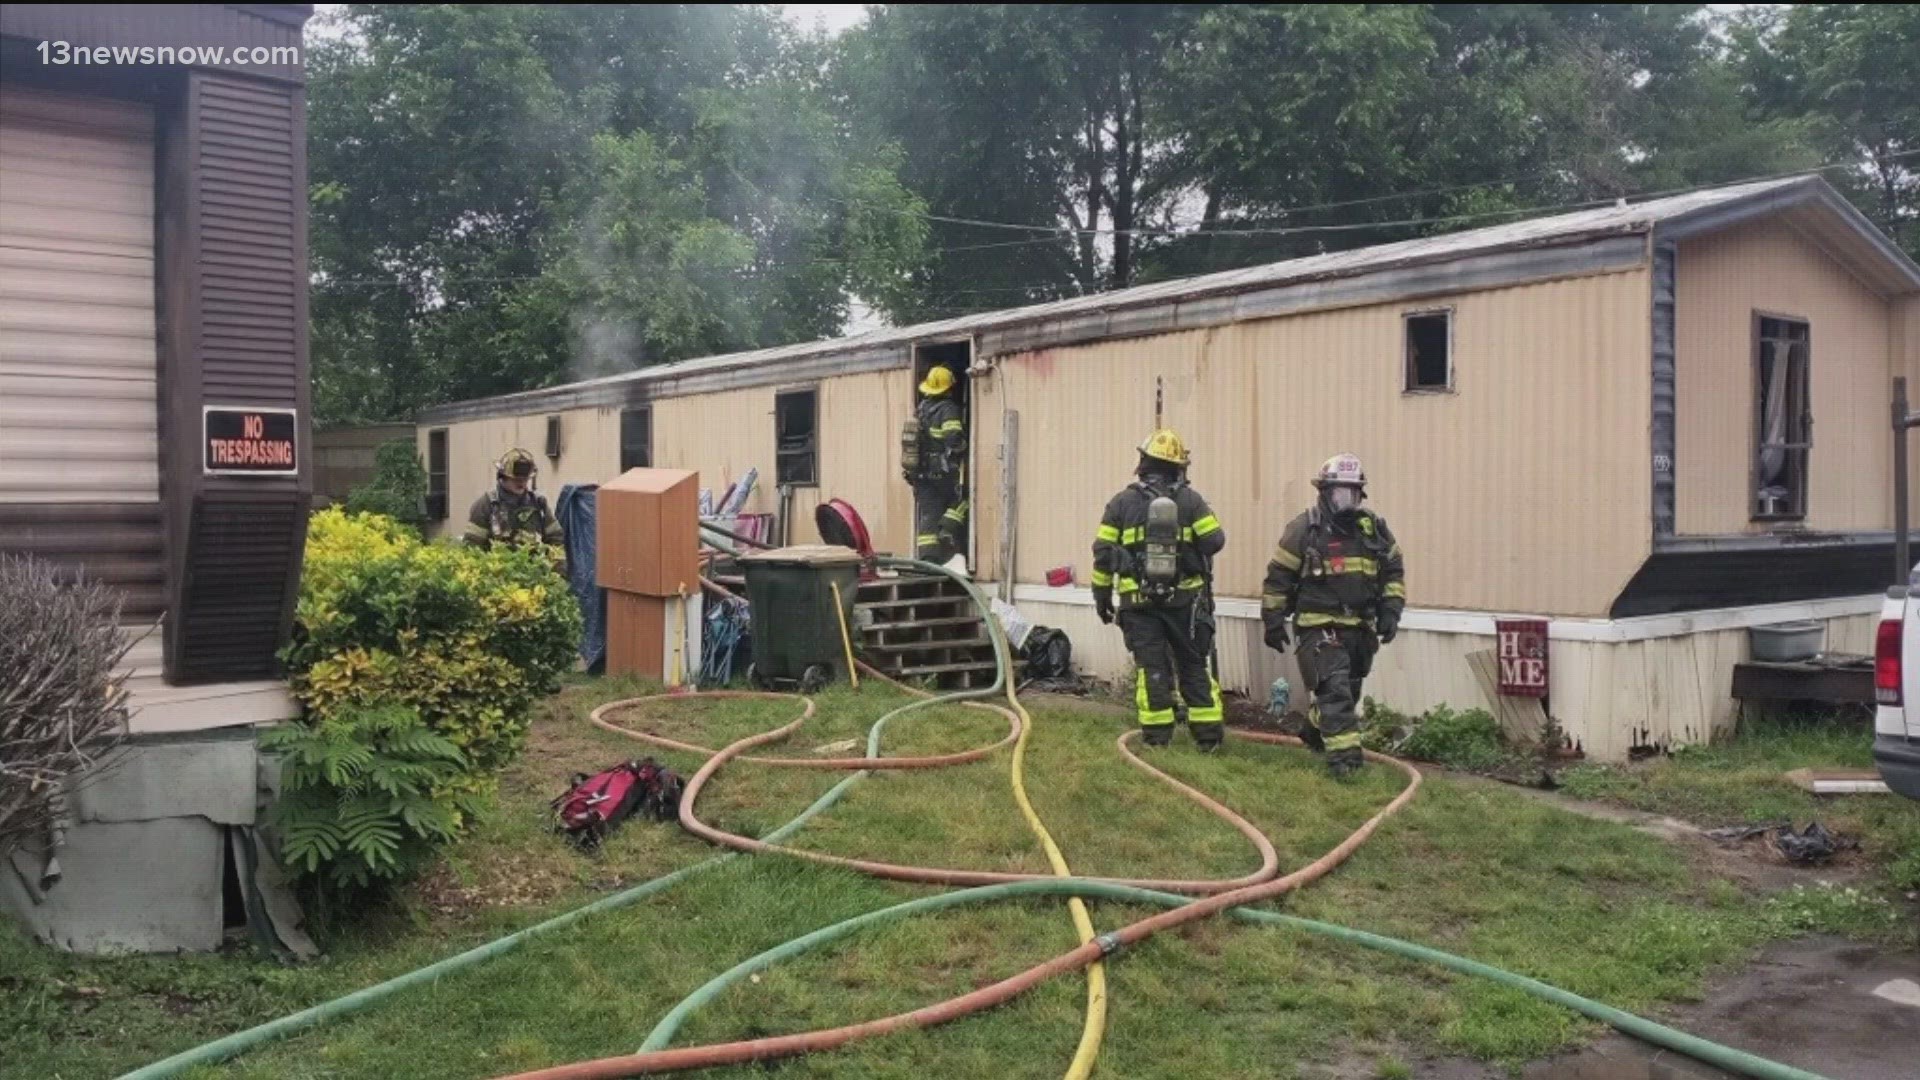 A family has lost several pets after a fire this afternoon in Chesapeake